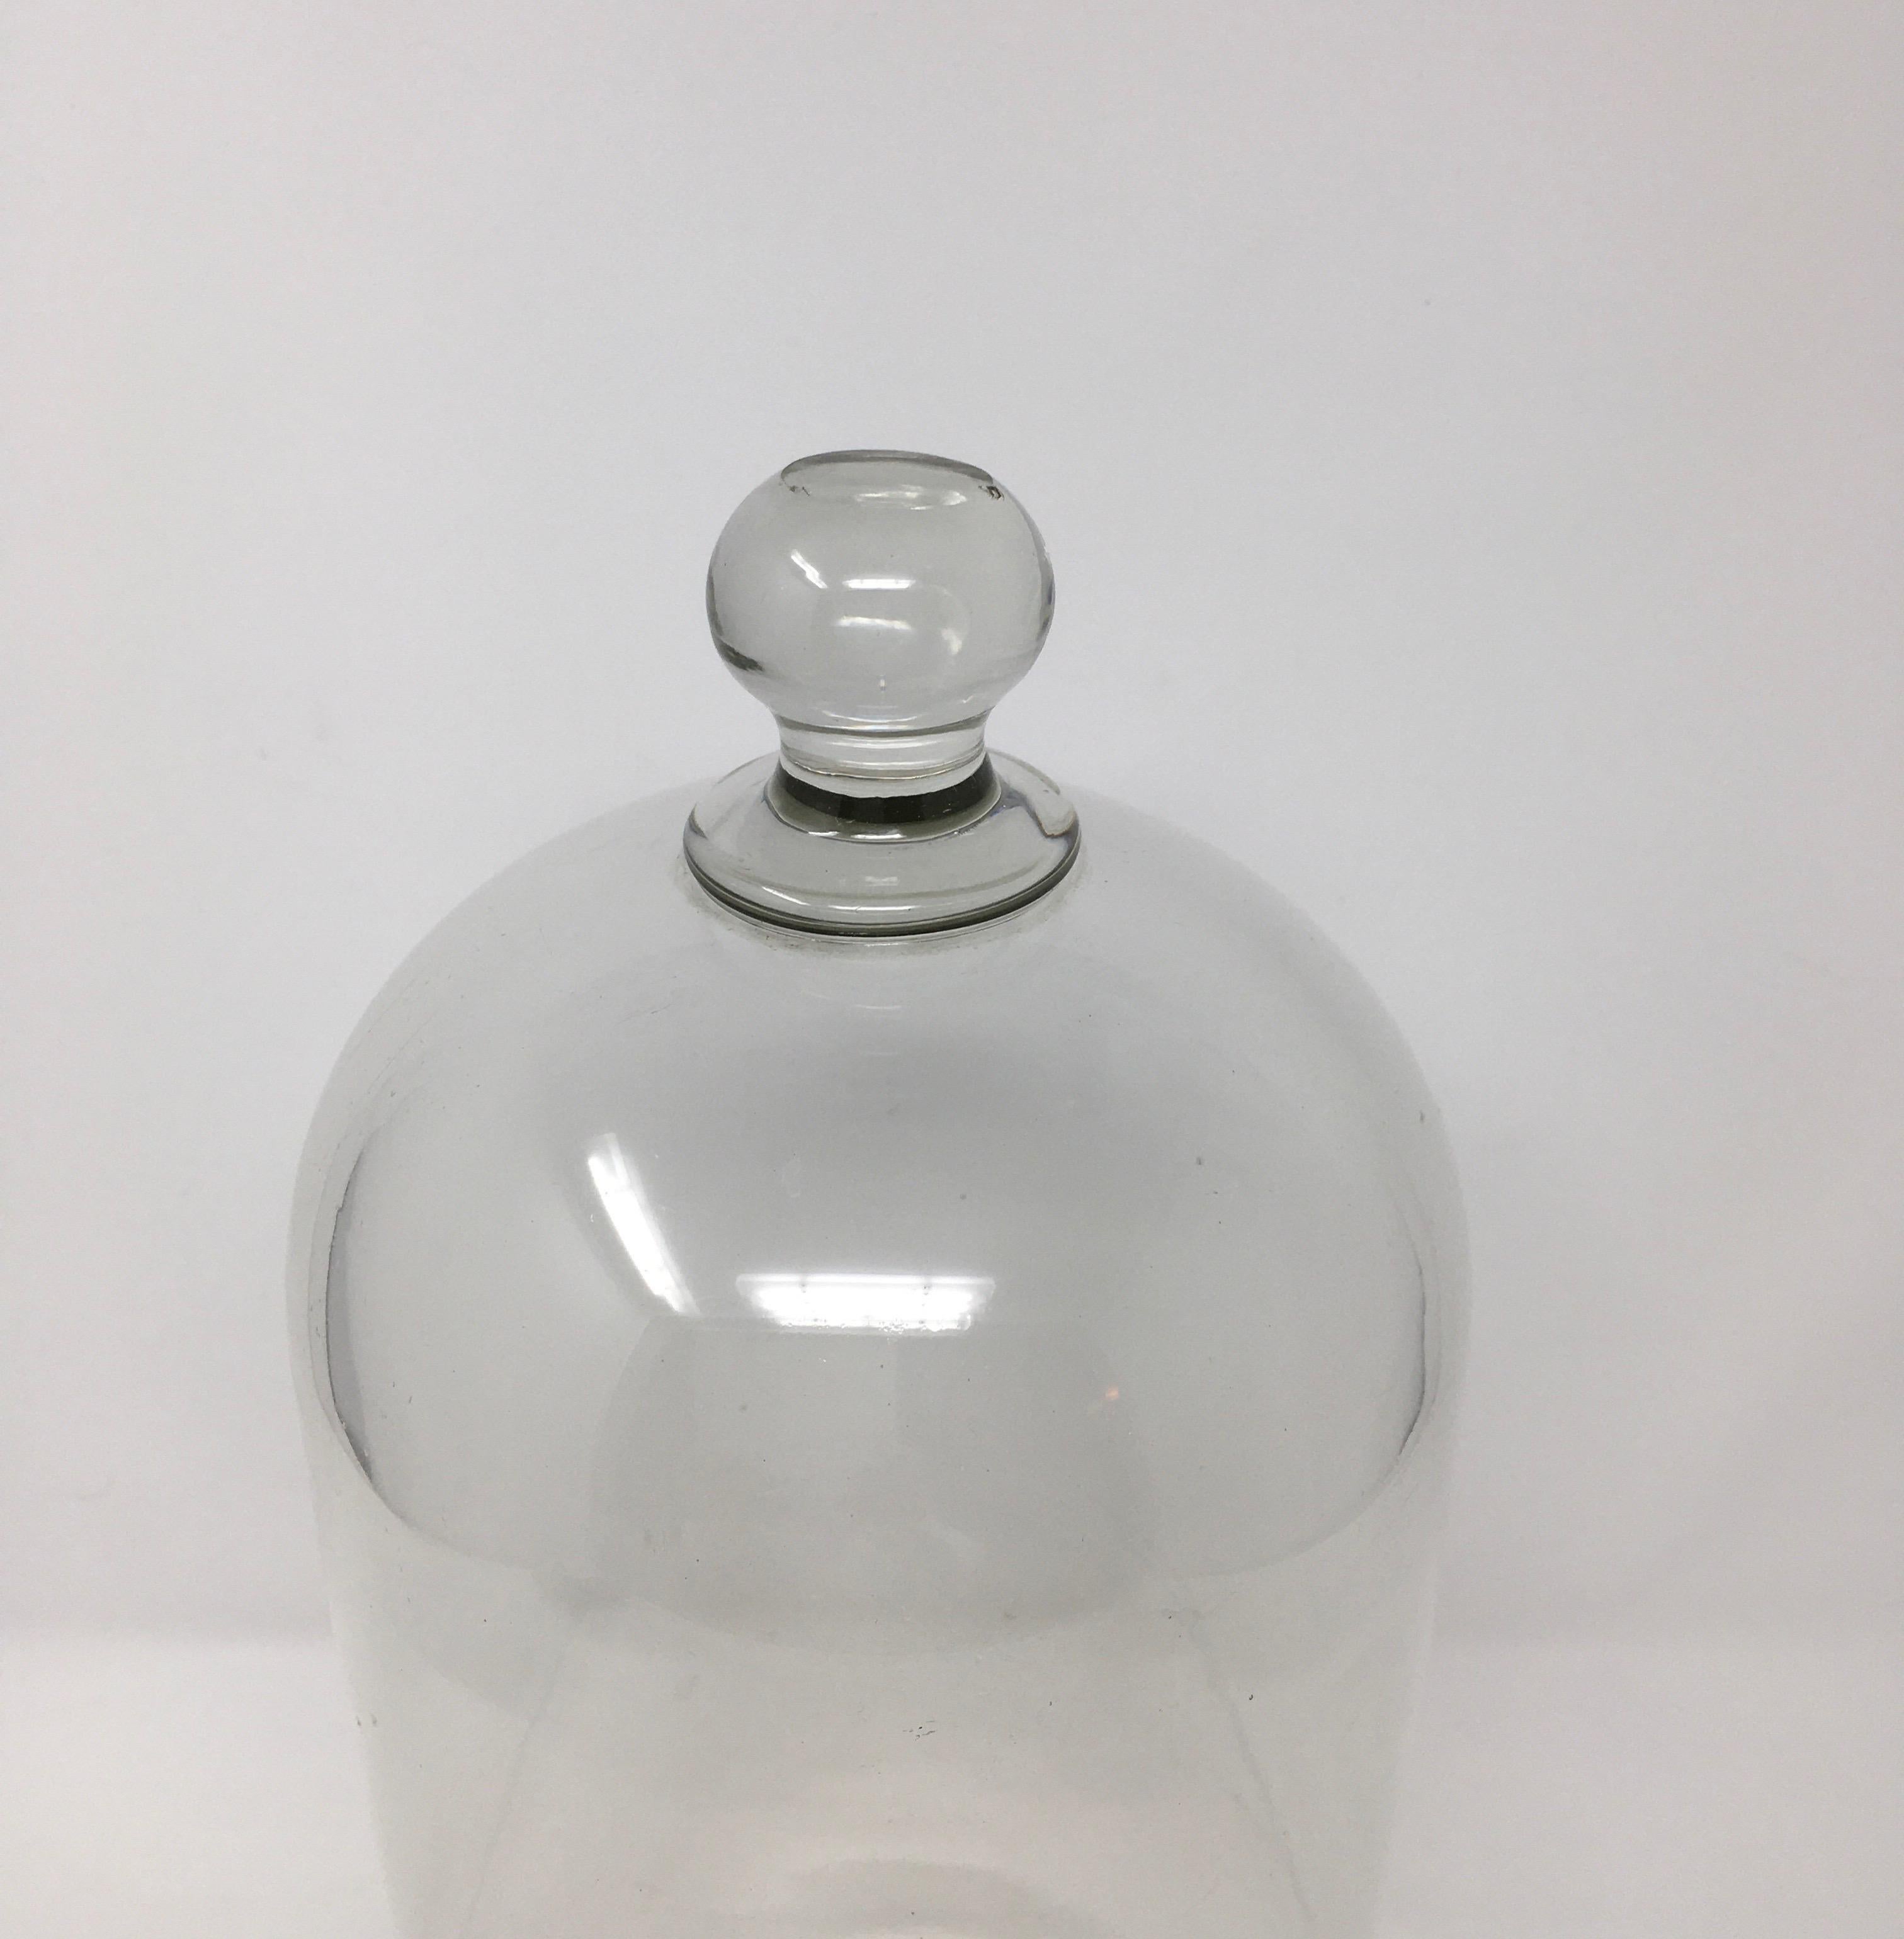 French antique patisserie glass dome cloche with a solid glass knob handle. Smooth and polished glass, these were used in French Shop's and Gardens to cover and display various items.